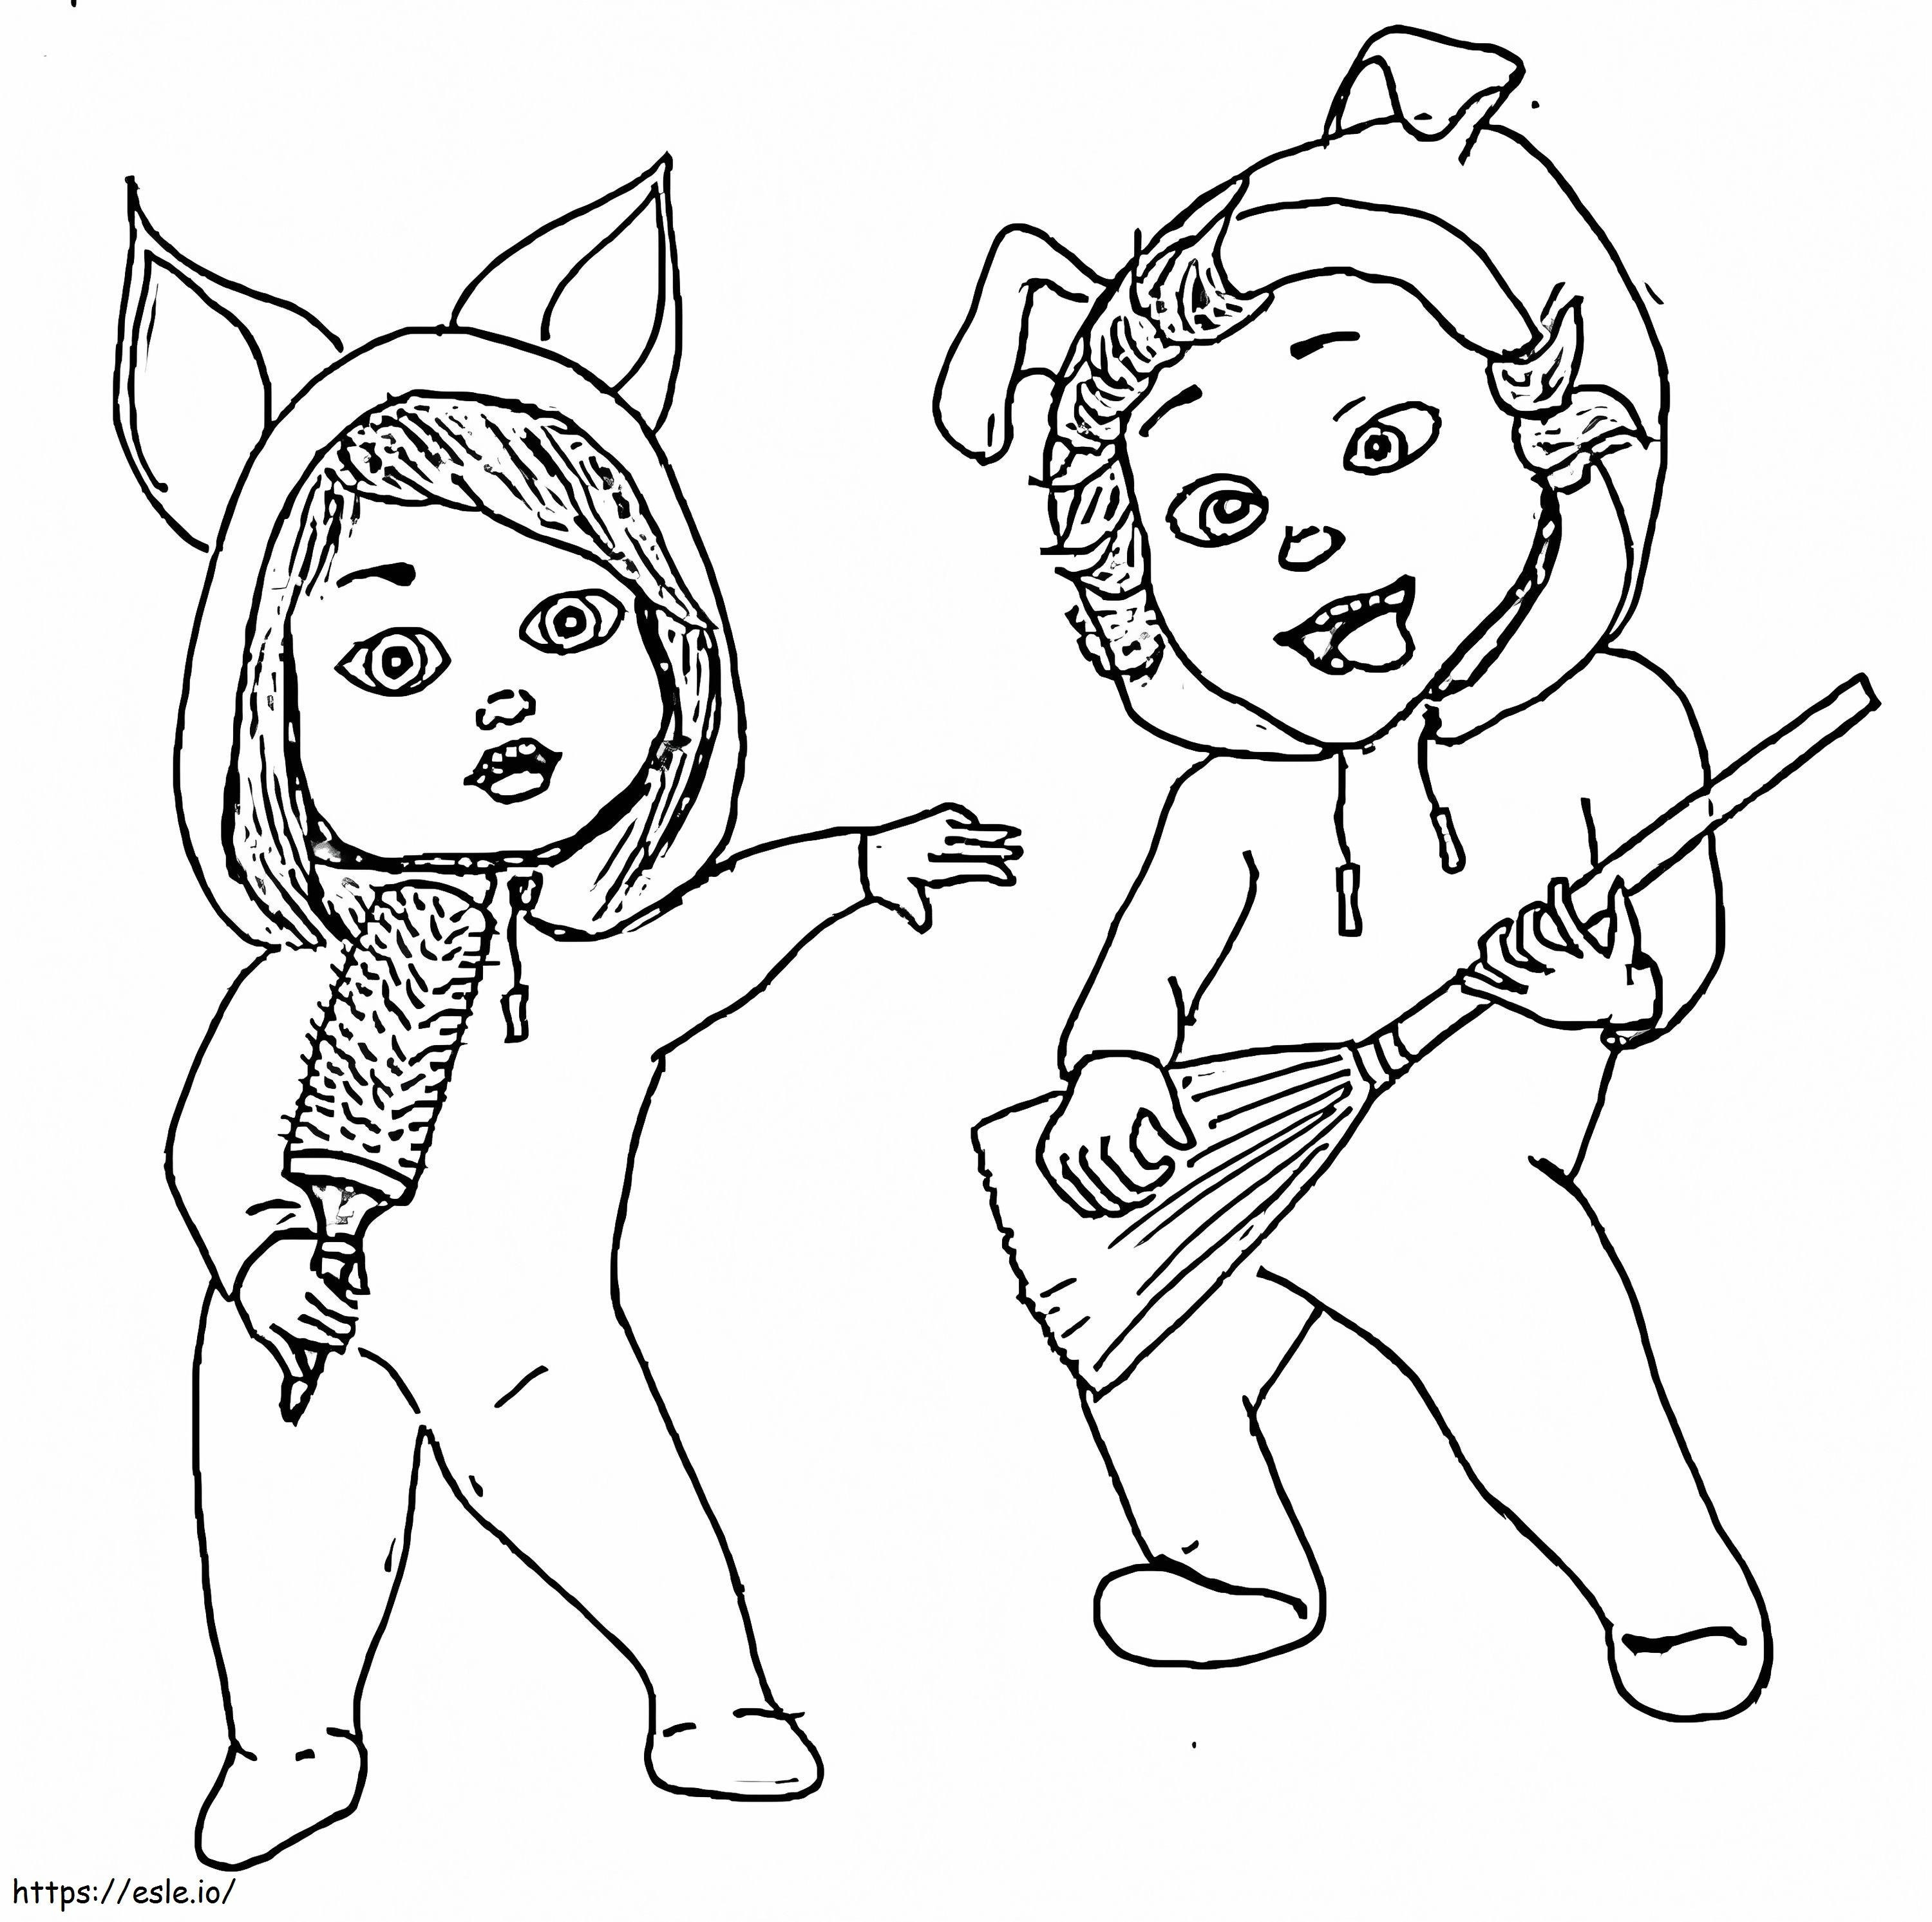 Funny Dave And Ava coloring page